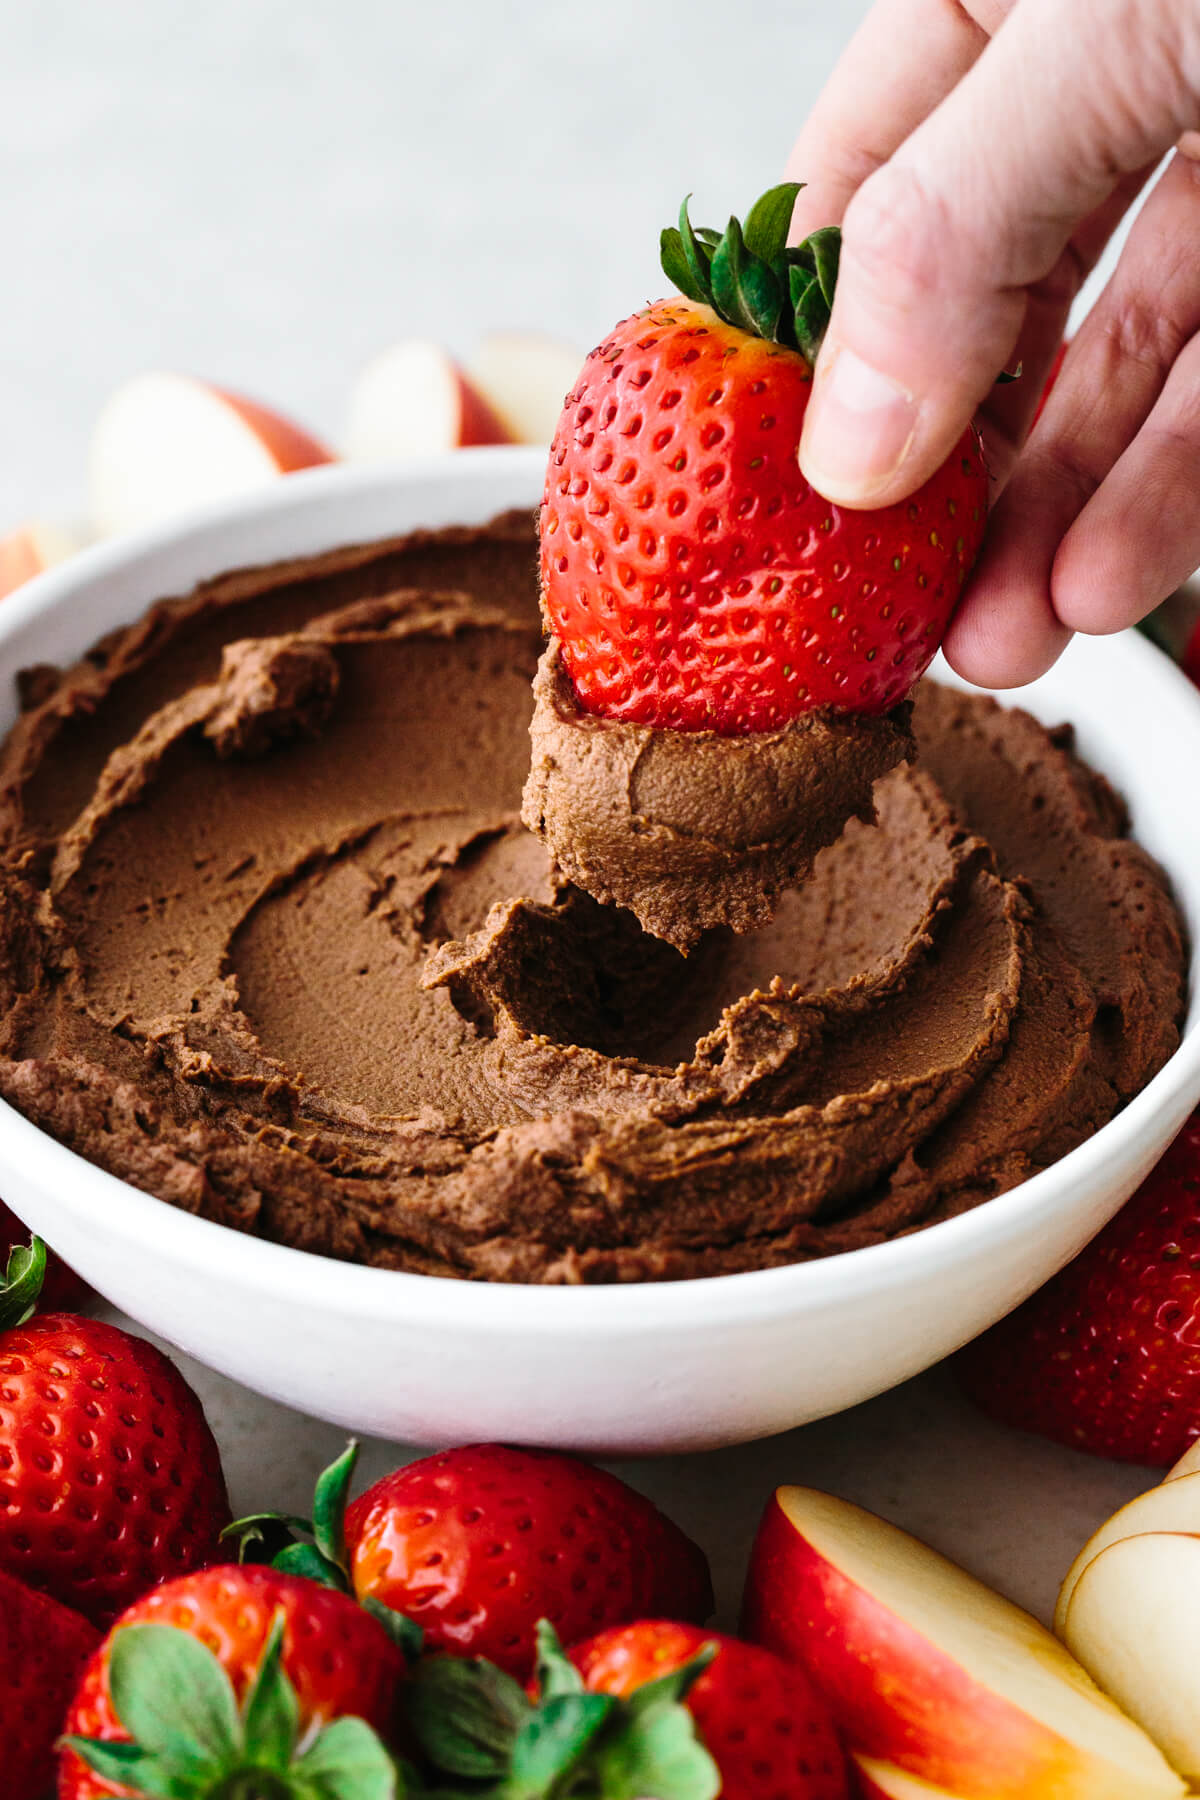 Dipping a strawberry into chocolate hummus.